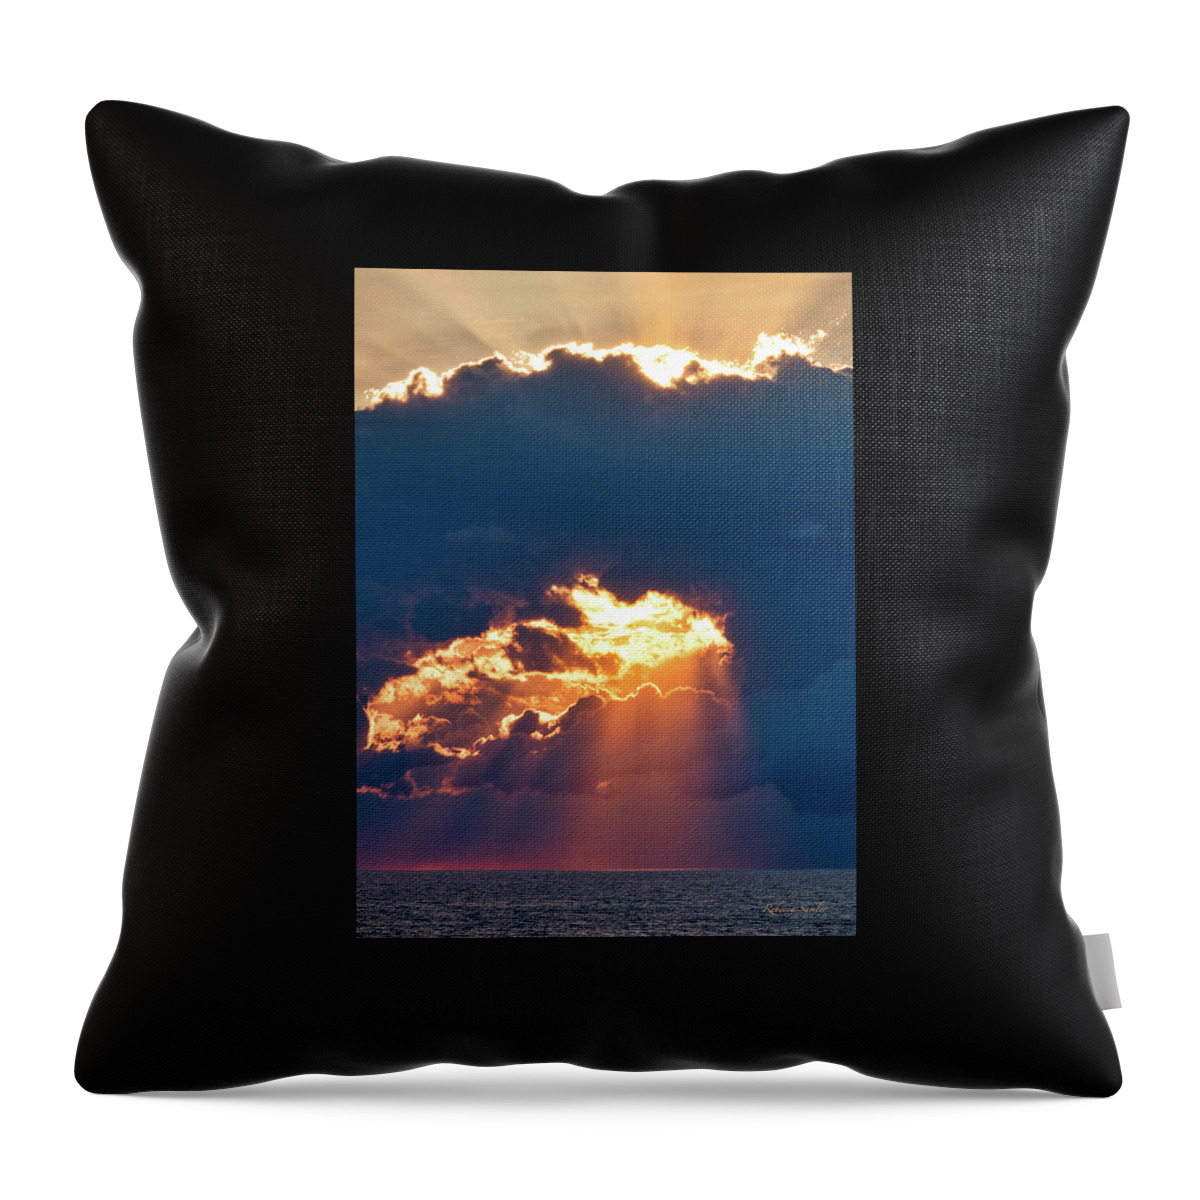 Sunset Throw Pillow featuring the photograph Stormy Sunset by Rebecca Samler